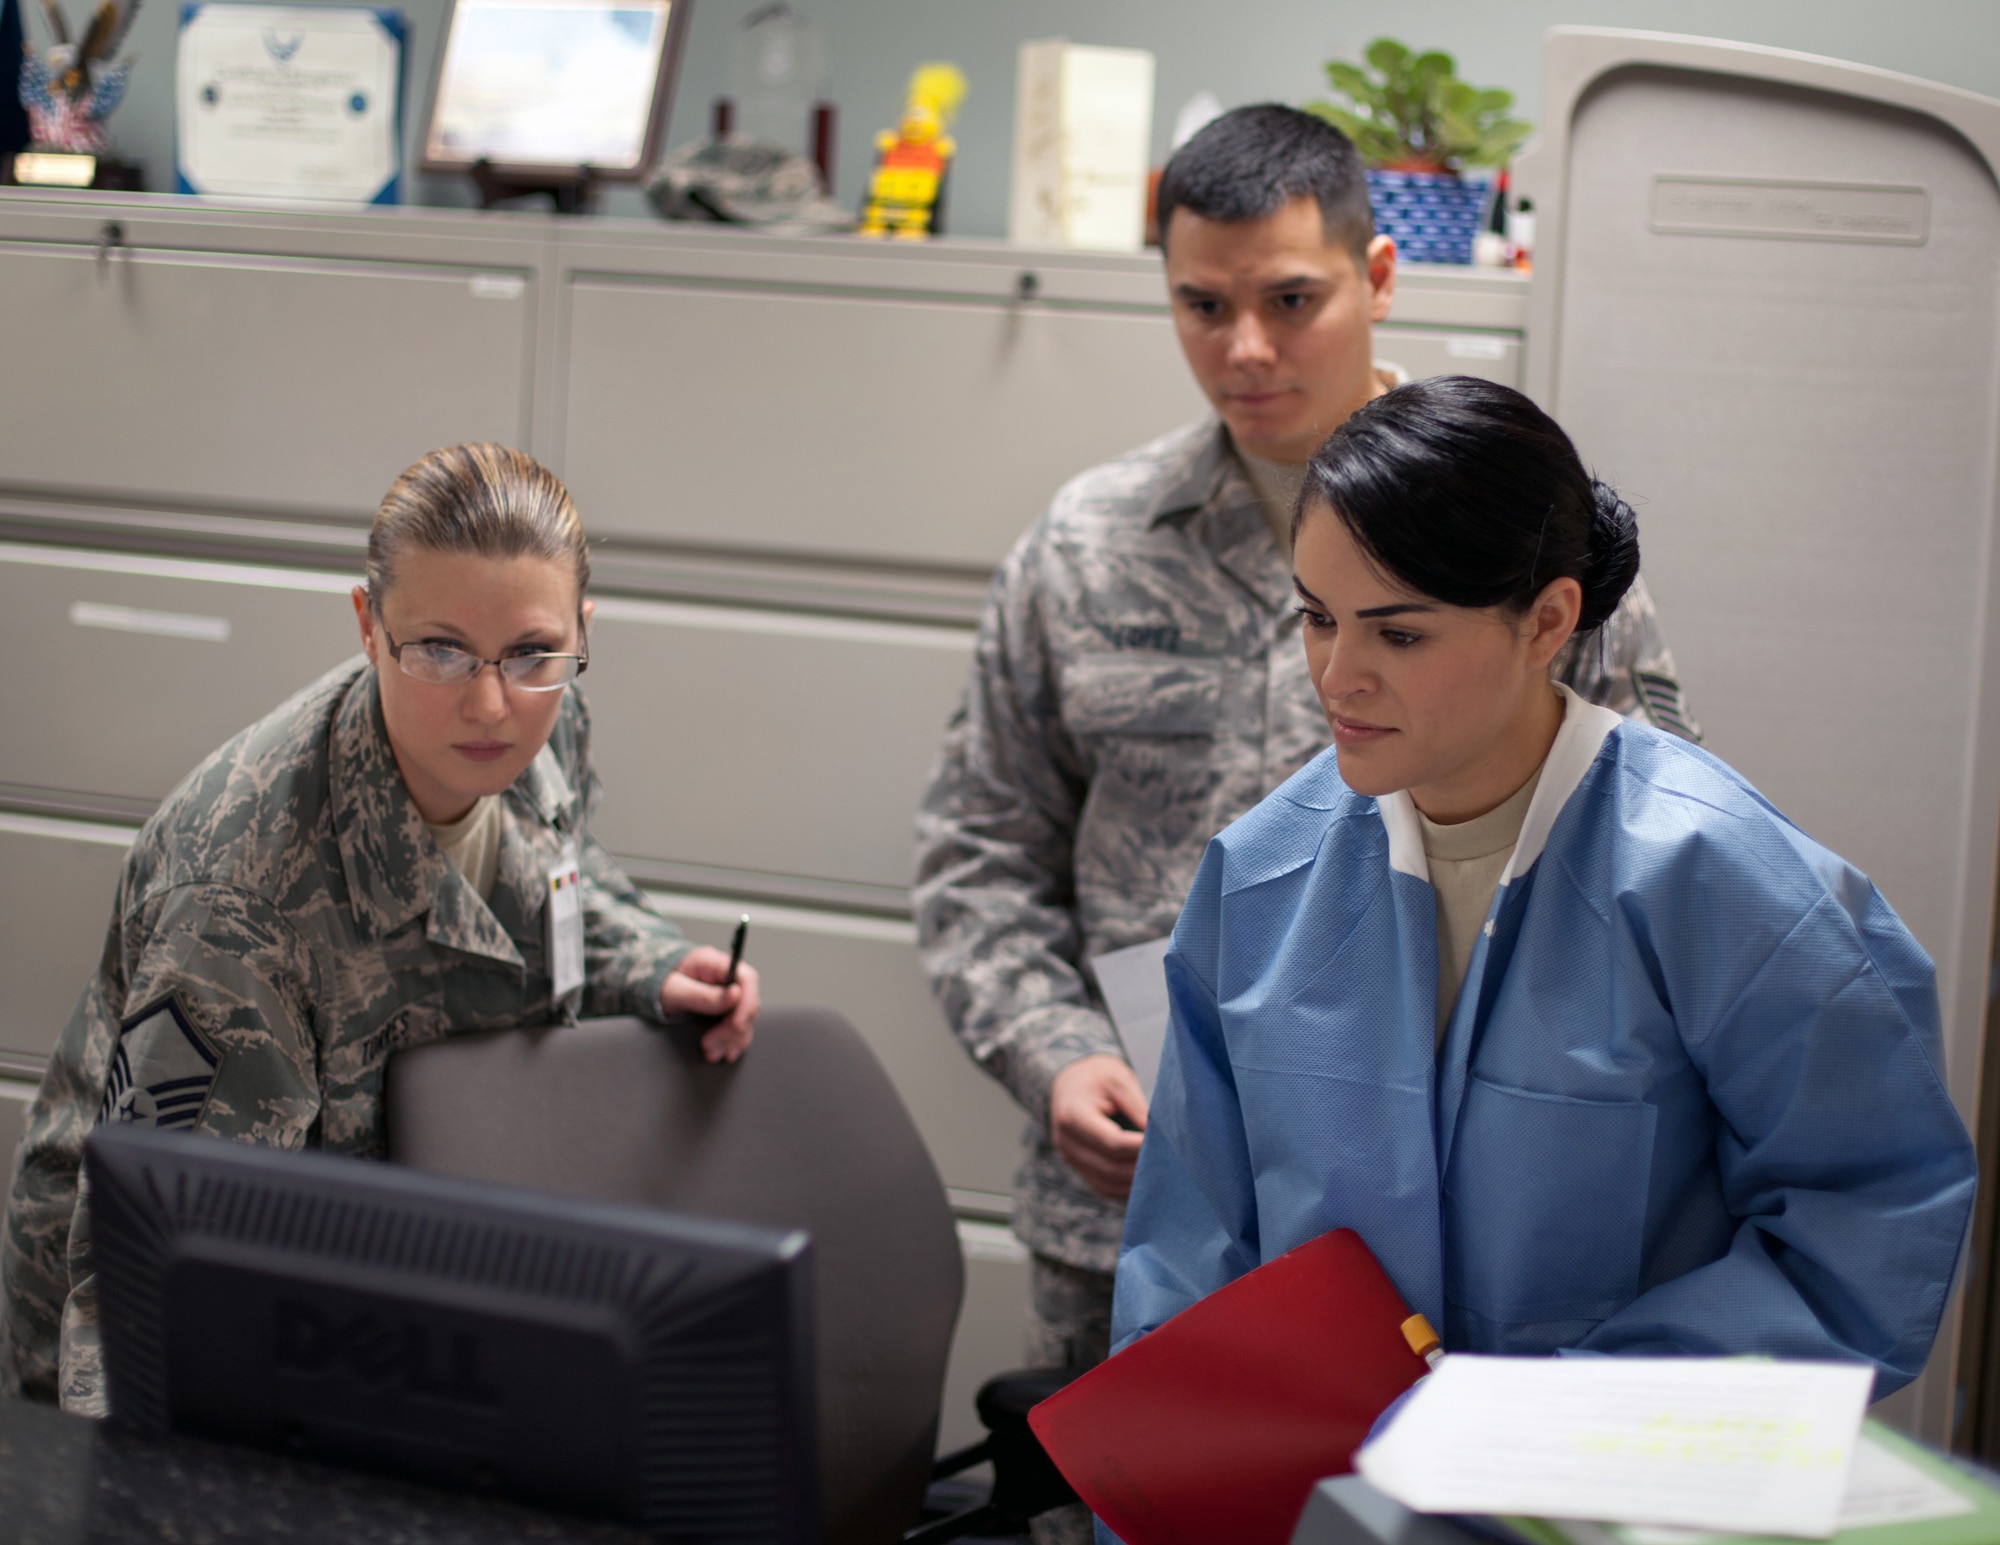 Master Sgt. Sarah Torres, noncommissioned officer in charge of the 349th Aeromedical Medicine Squadron's clinical laboratory, helps Staff Sgt. Daniel Lopez and Senior Airman Veronica Barros work through a computer procedure at the front window of the lab at David Grant USAF Medical Center. (U.S. Air Force photo / Lt. Col. Robert Couse-Baker)